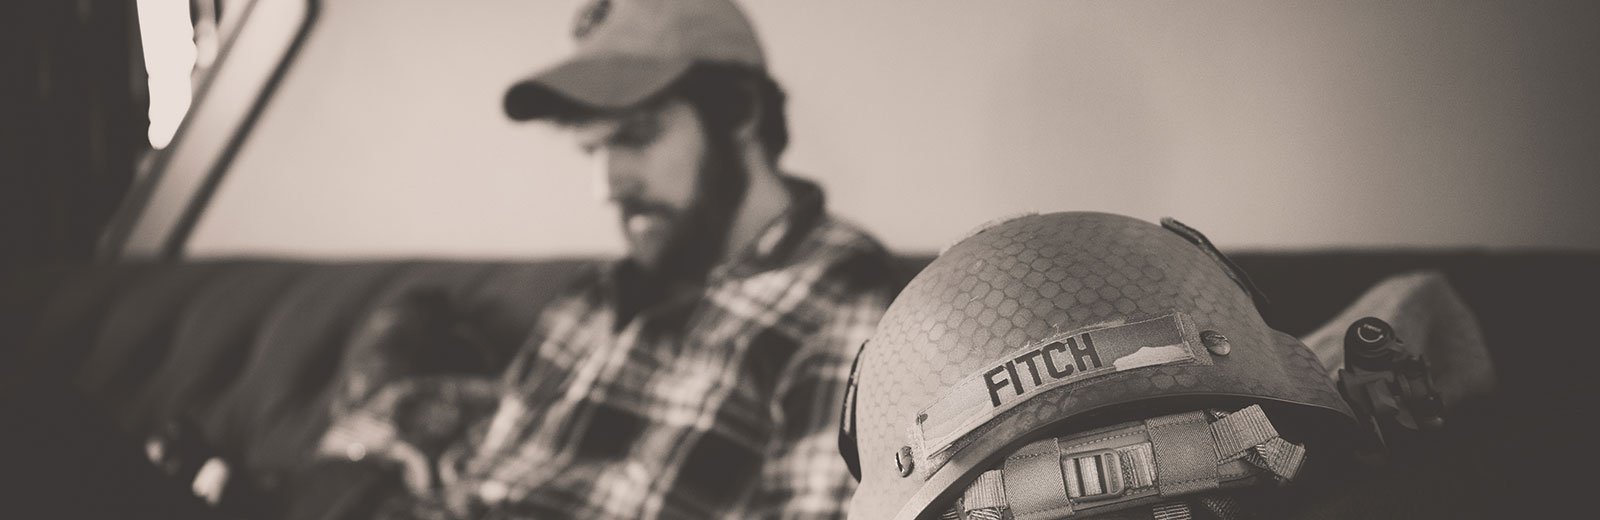 Justin Fitch in the background and his military helmet with his name in the foreground.